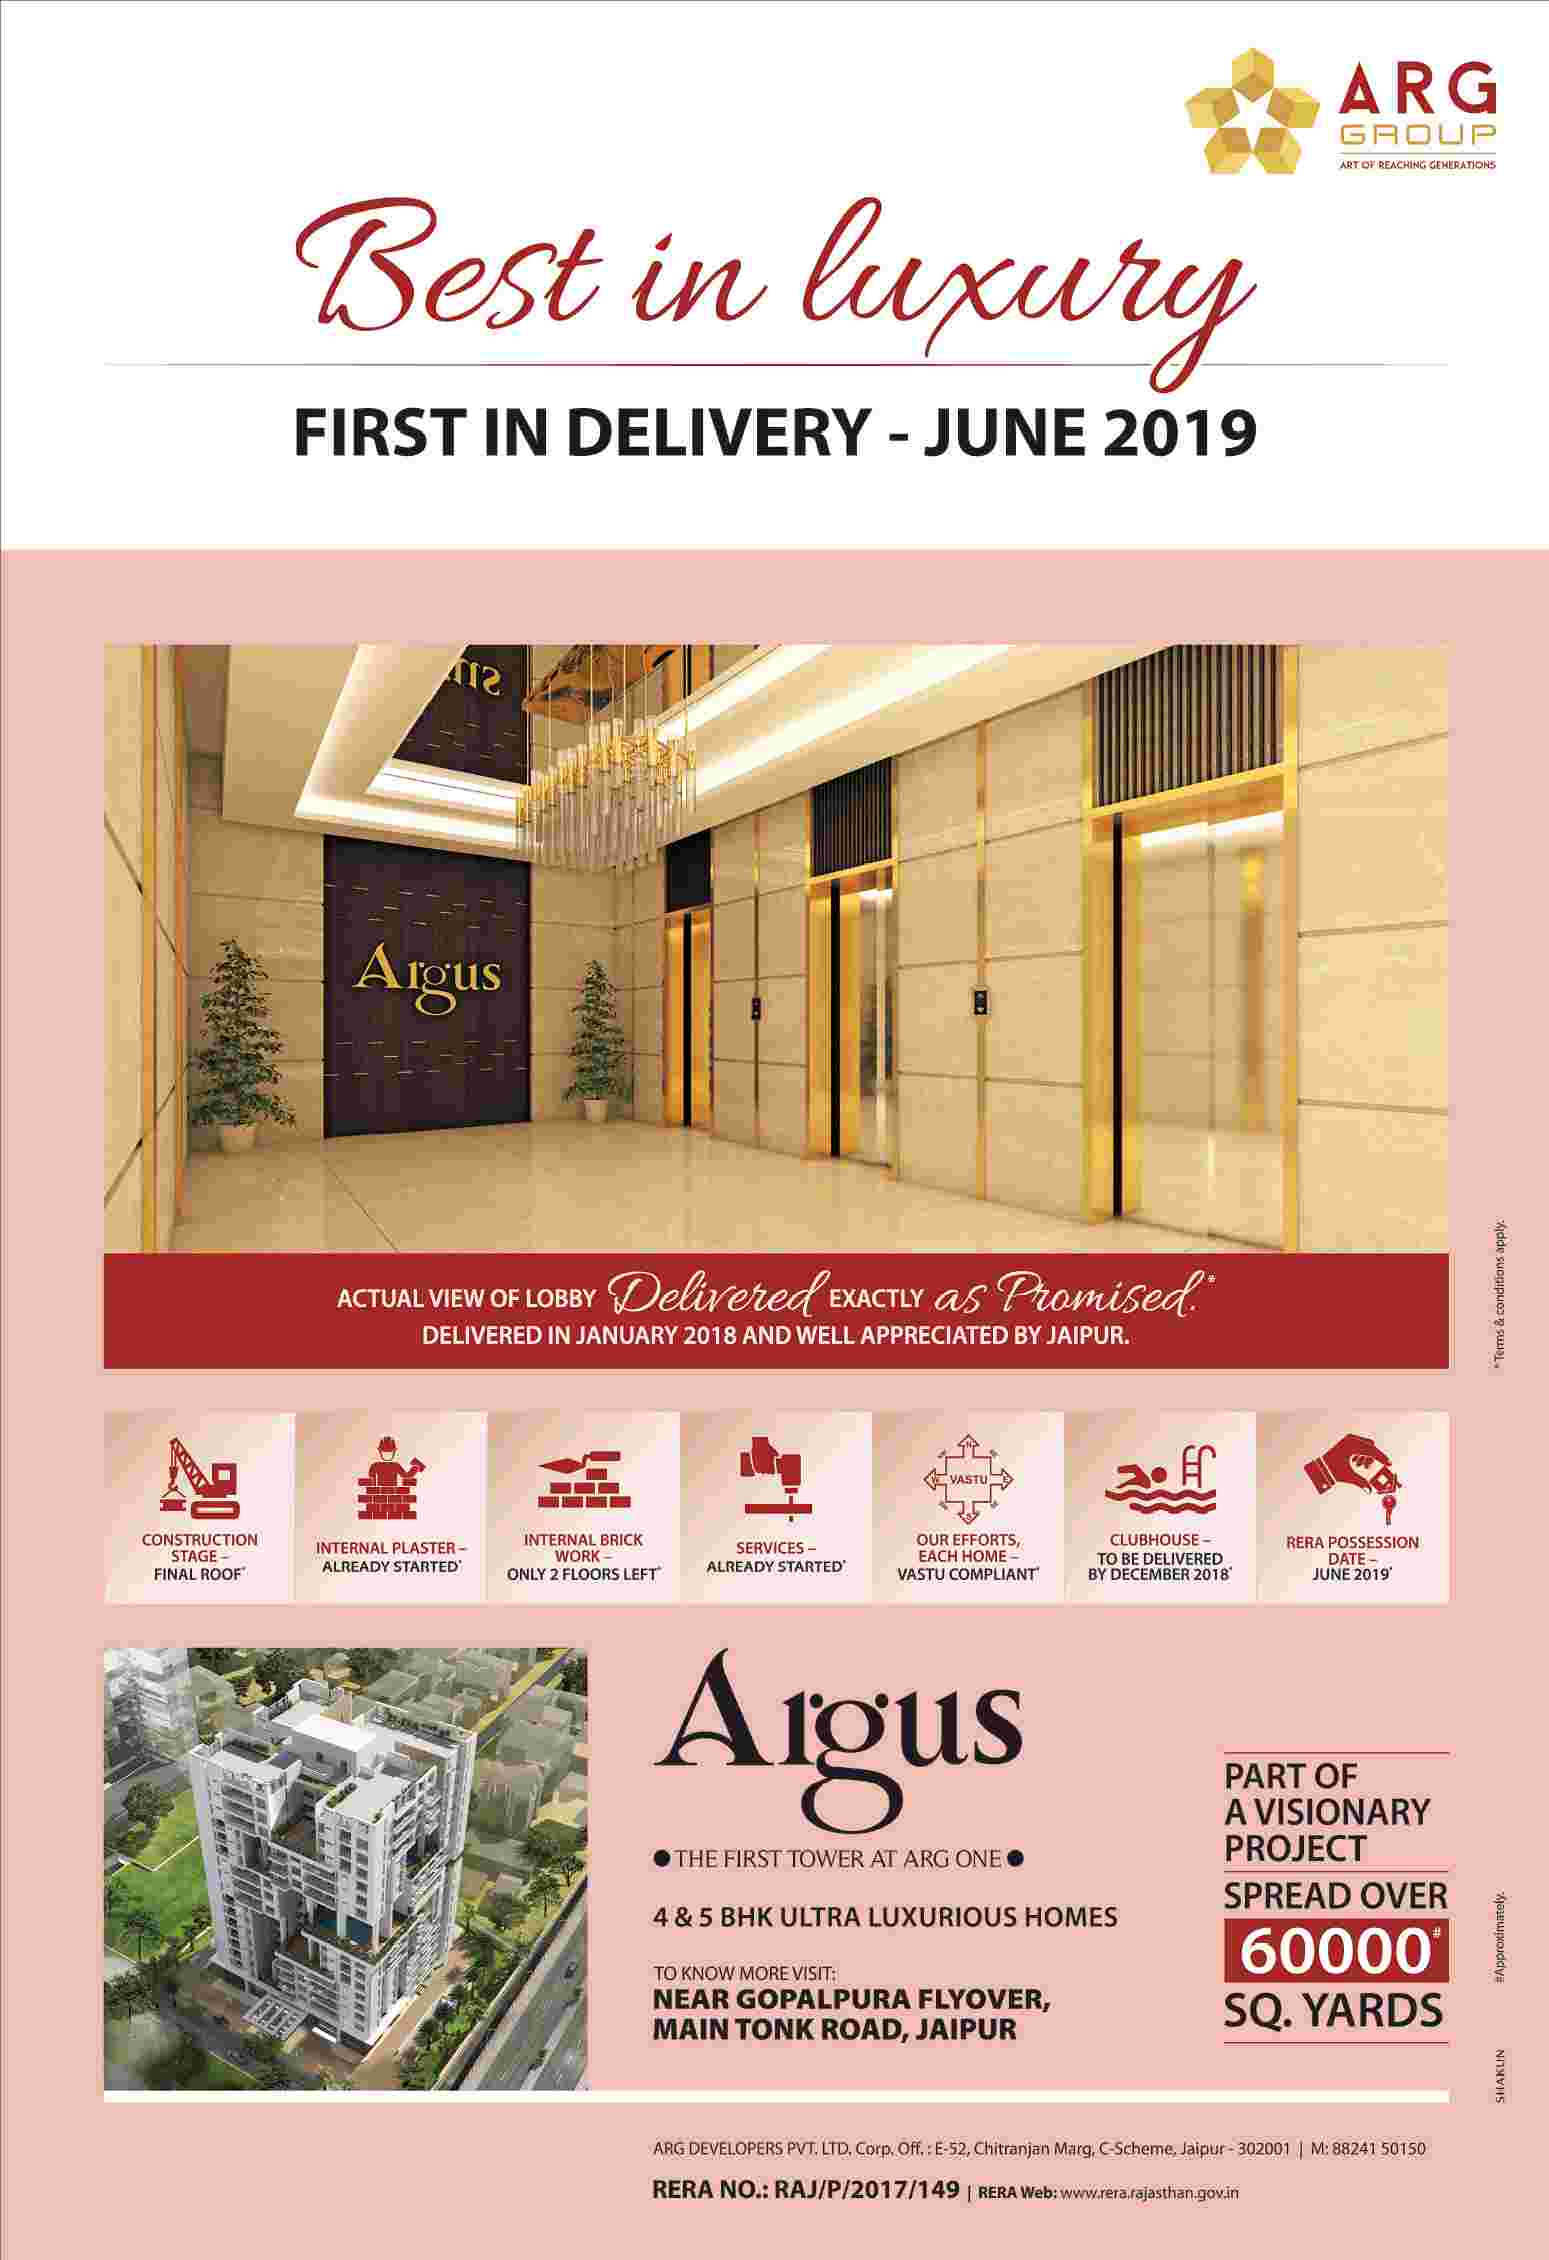 Book luxurious 4 & 5 BHK homes at ARG One Argus in Jaipur Update